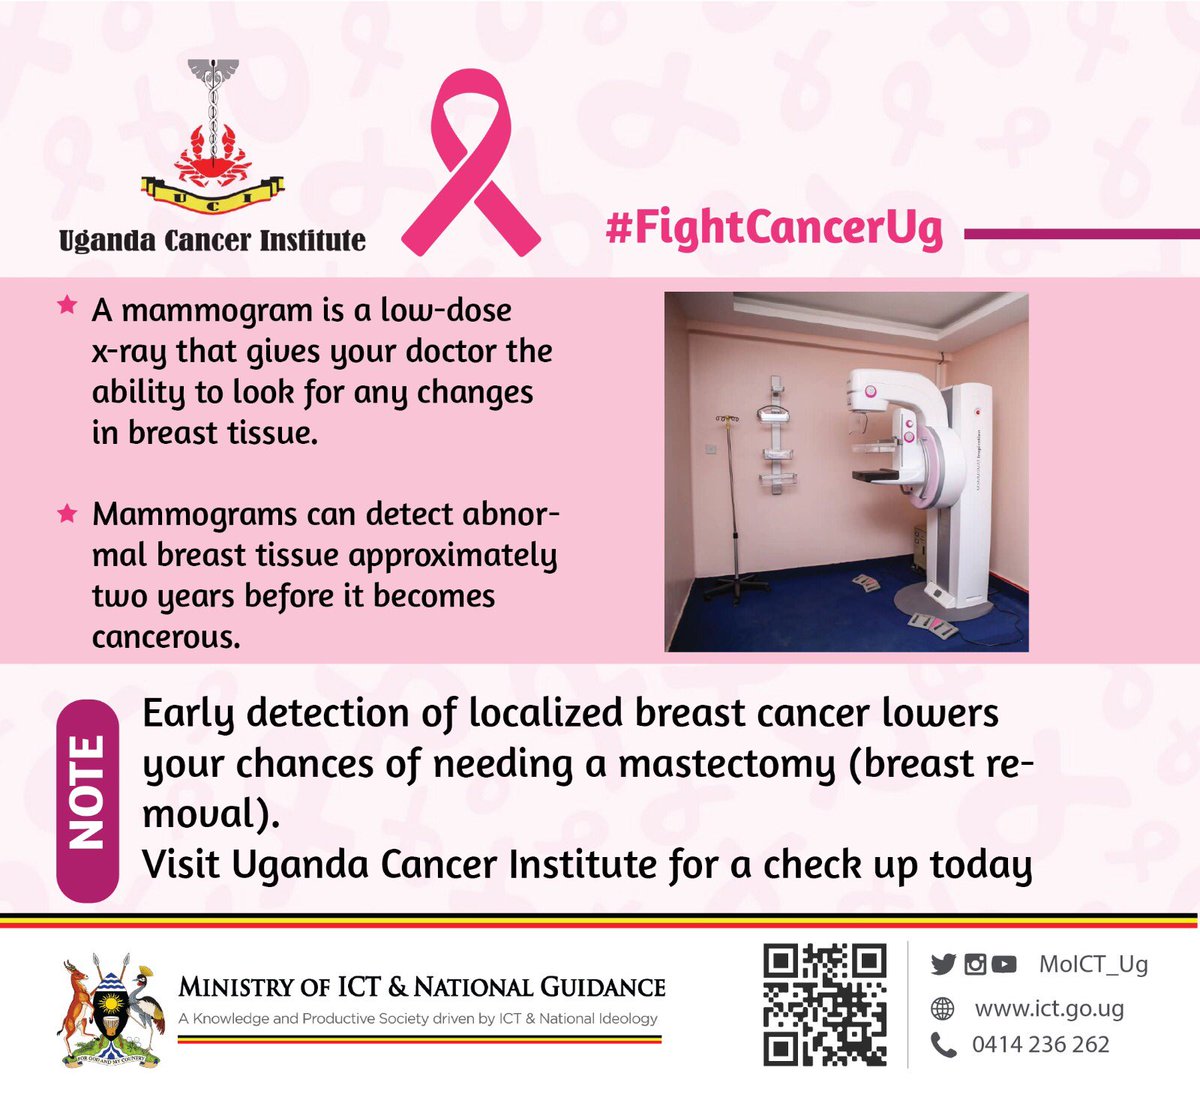 Breast cancer is a disease in which cells in the breast turn into cancer. It occurs in women and rarely in men. Therefore individuals are called upon to visit @UgandaCancerIns for a check up to avoid later stages of cancer.
@MinofHealthUG 
#FightCancerUg